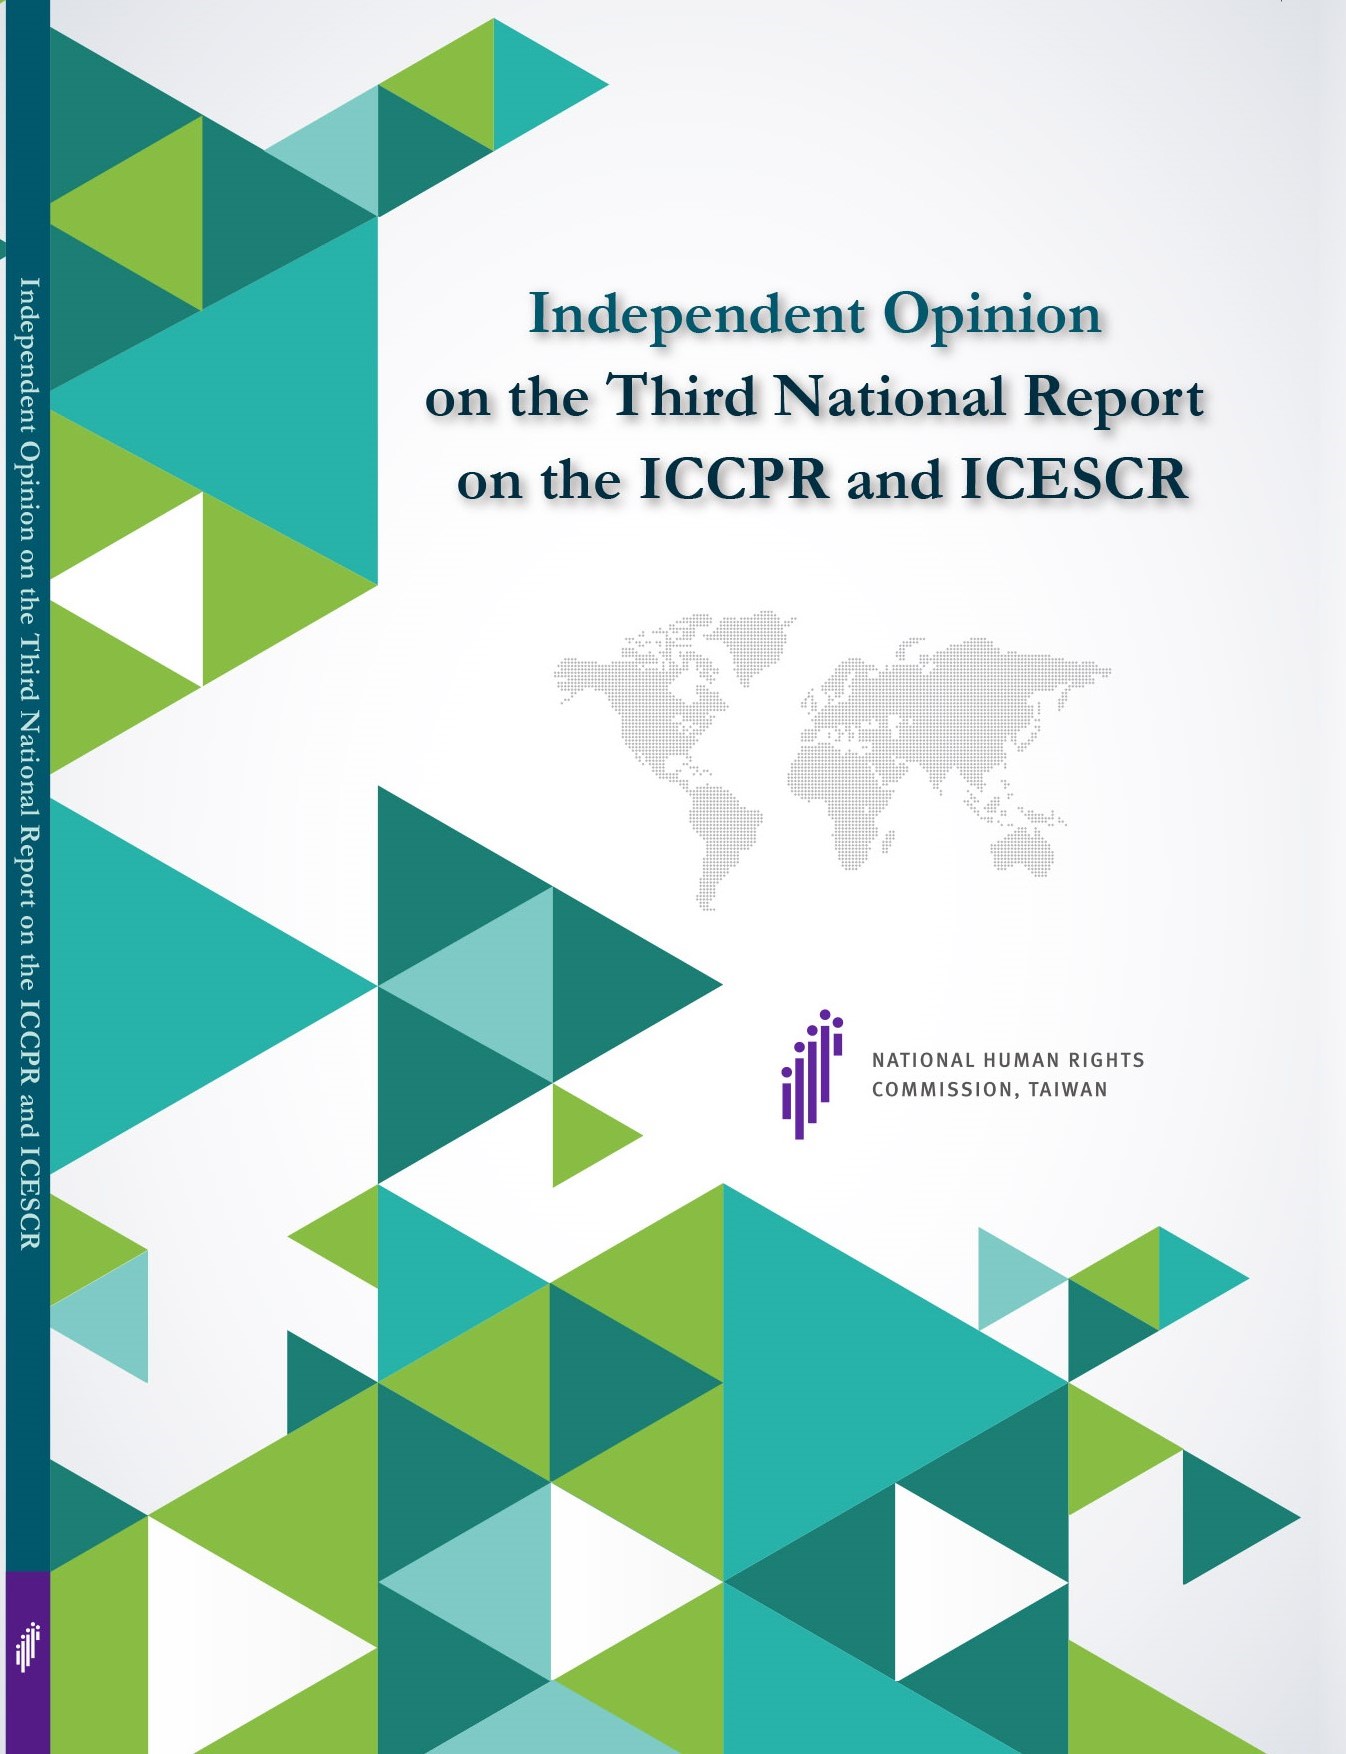 Independent Opinion on the Third National Report on the ICCPR and ICESCR